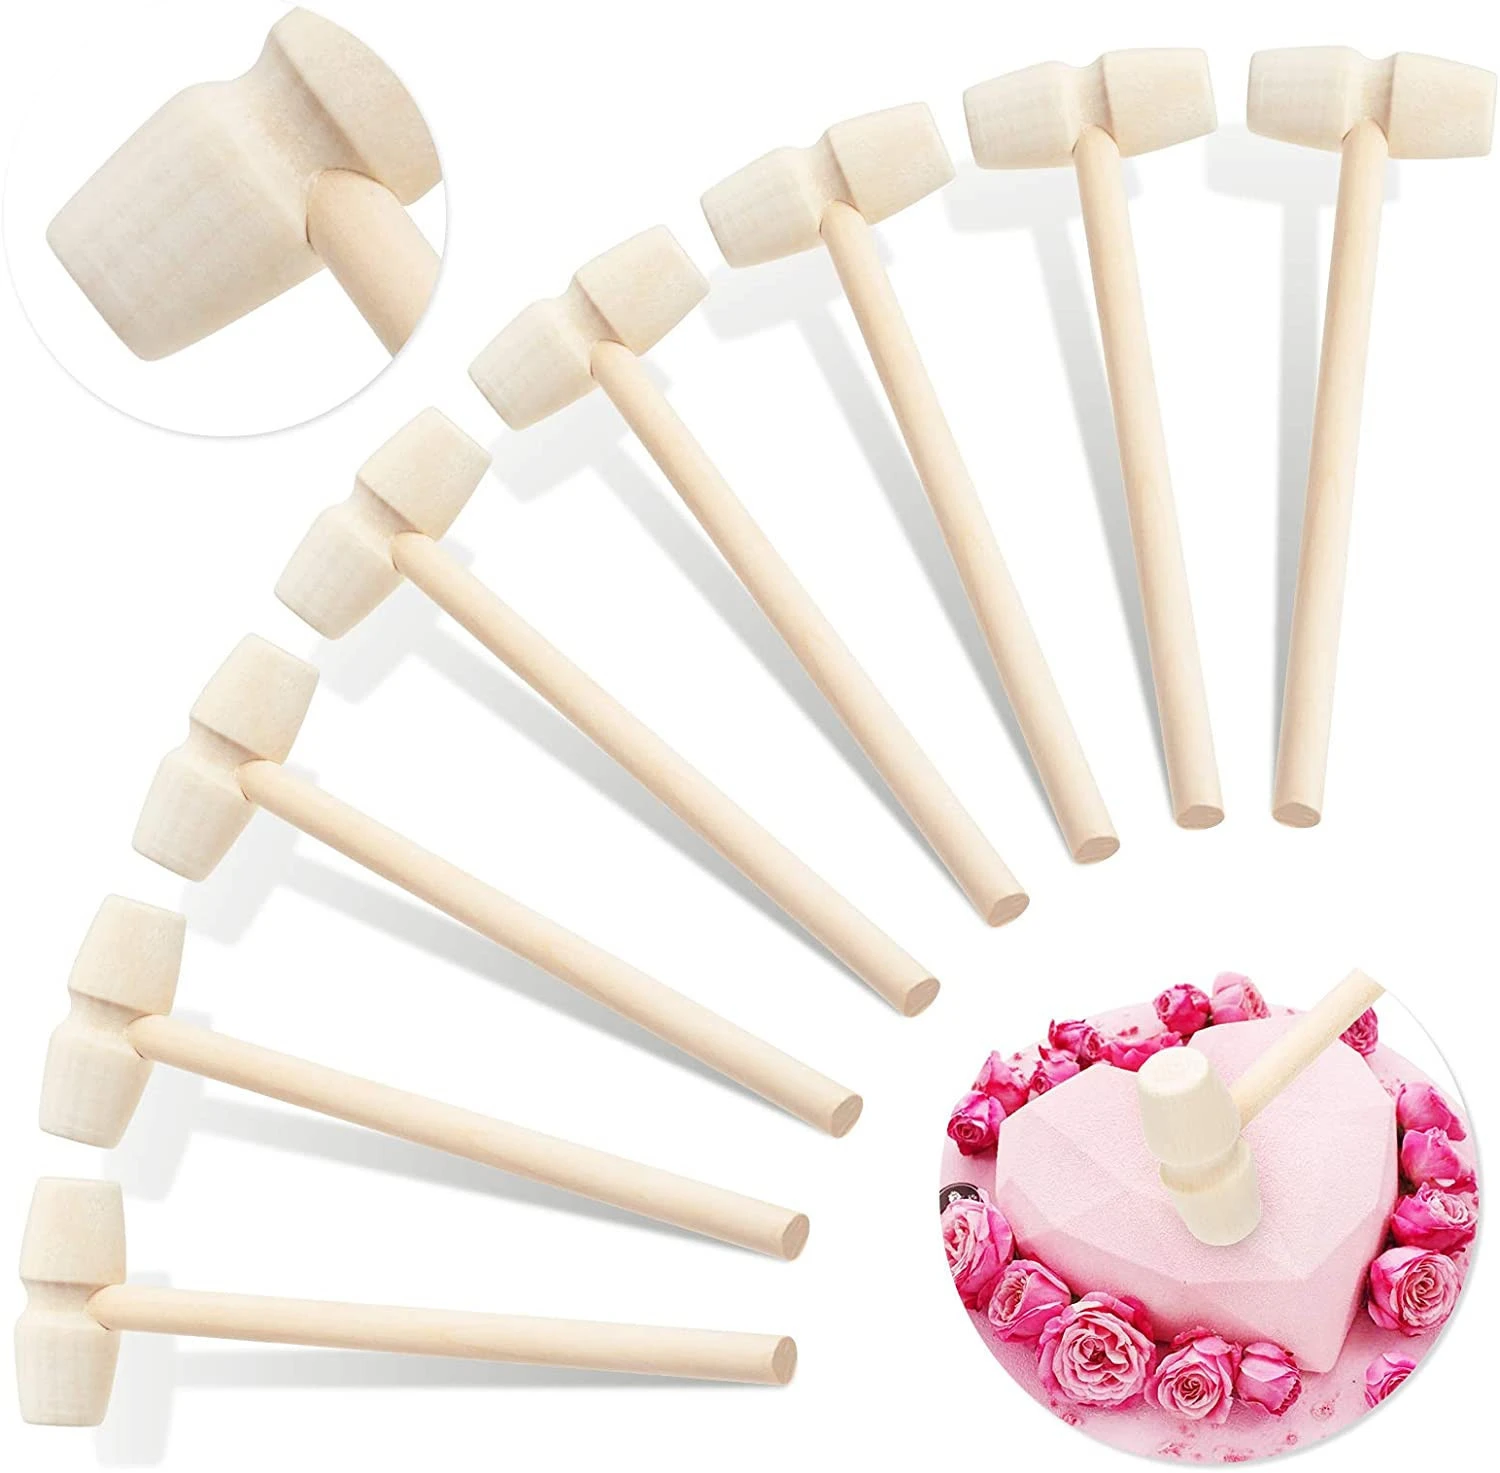 Hard Wooden Crab Lobster Mallets Solid Wood Cracking Seafood Shellfish Mallet Hammer for Chocolate Pounding Cute Beating Gavel